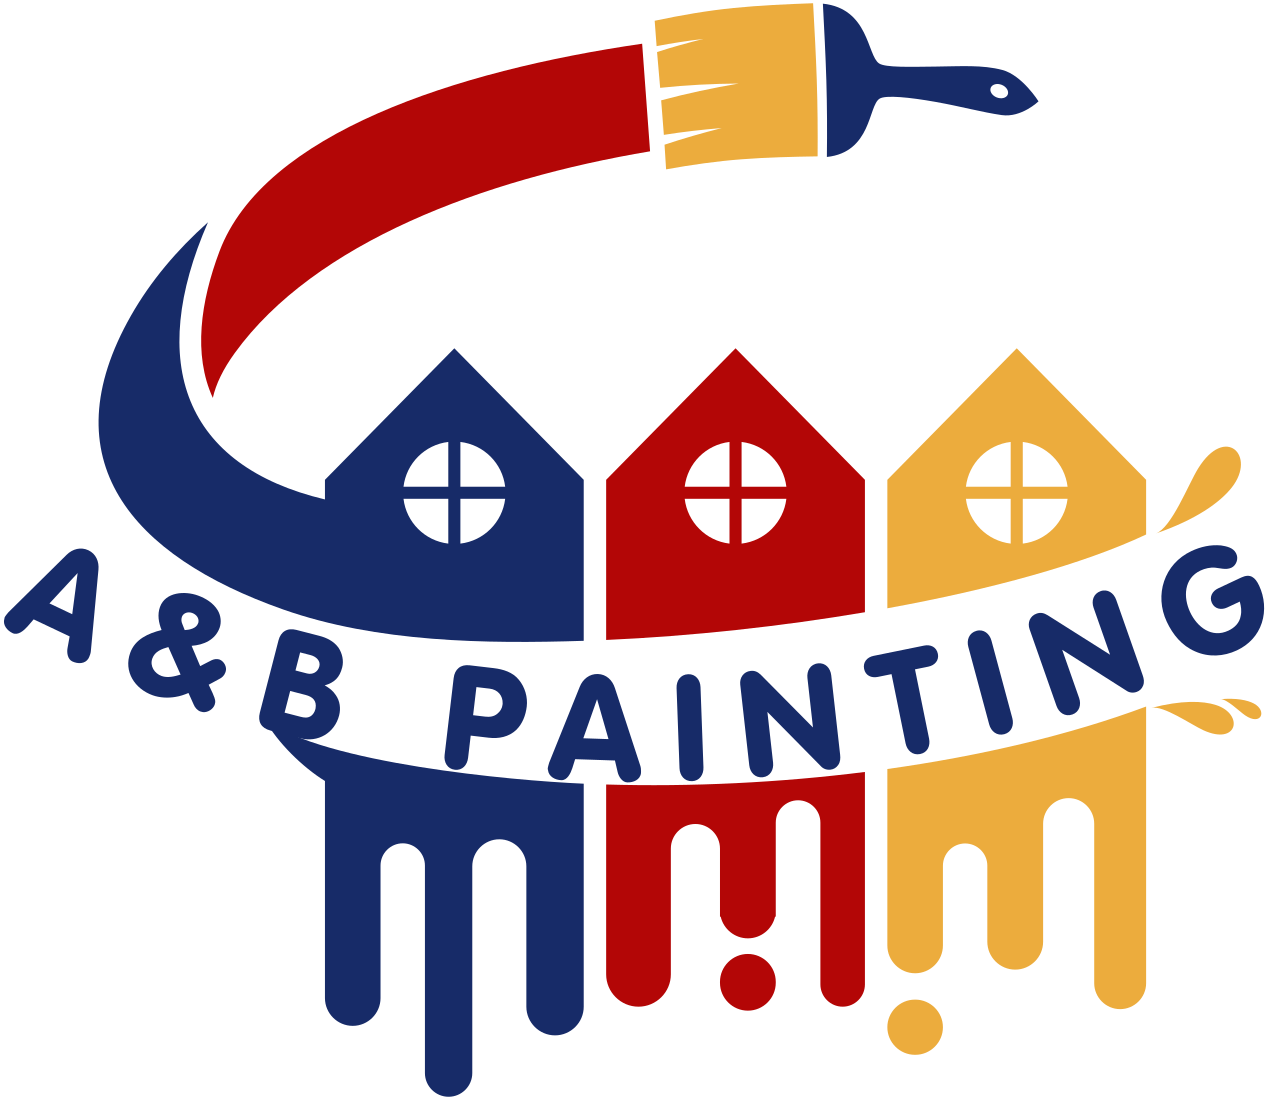 A&B Painting 's web page